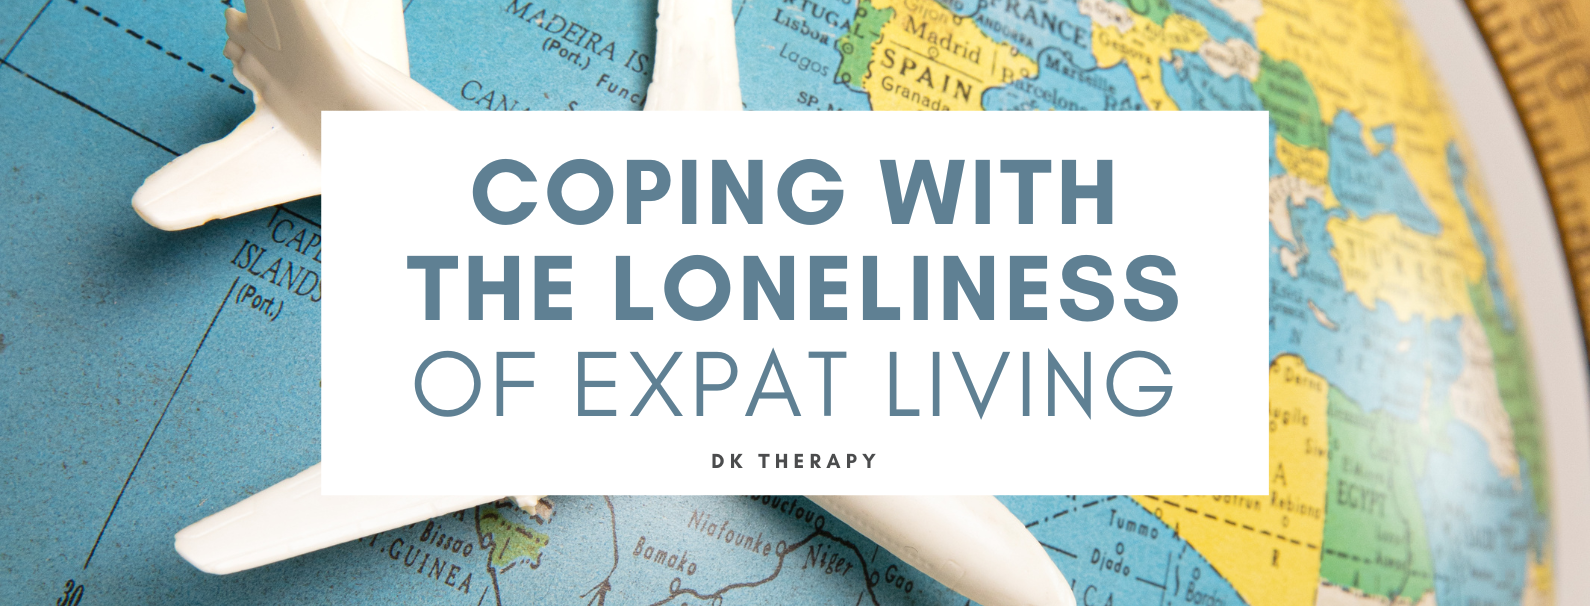 Coping With The Loneliness of Expat Living